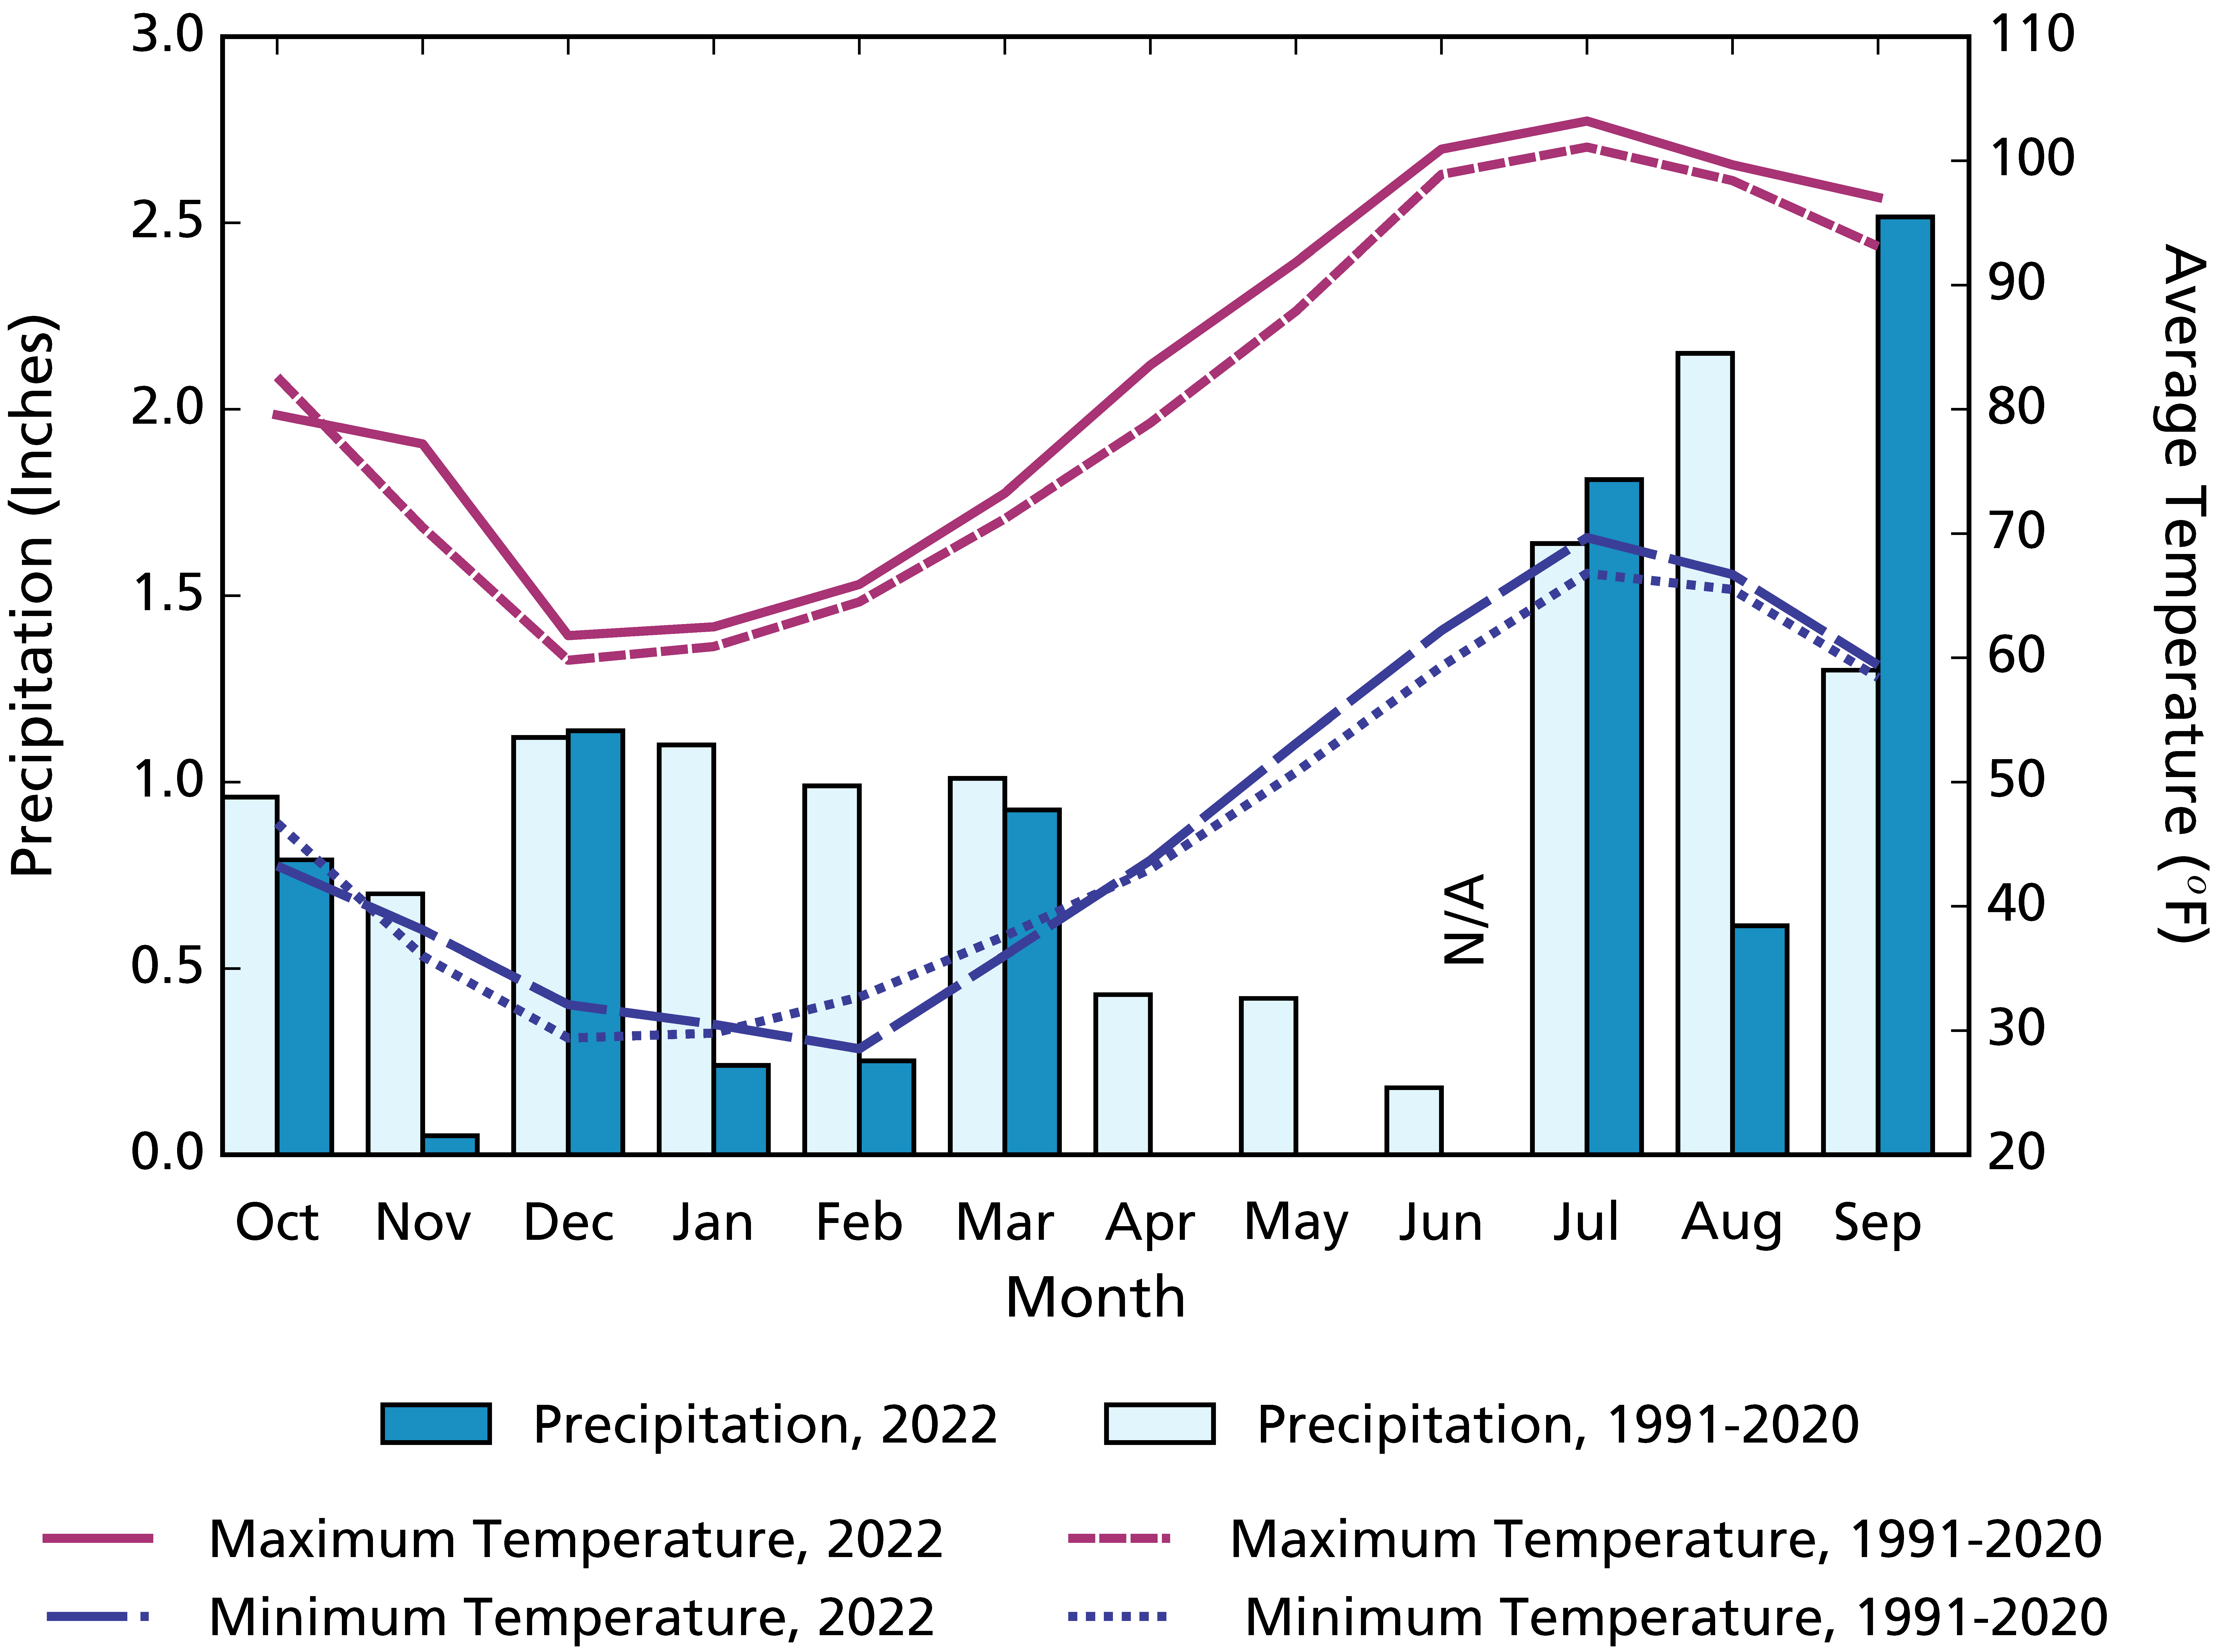 Climogram showing a bar graph for monthly precipitation data for 2022 and the 1991–2020 average, as well as a line graph for monthly minimum and maximum temperatures for 2022 and the 1991–2020 average.